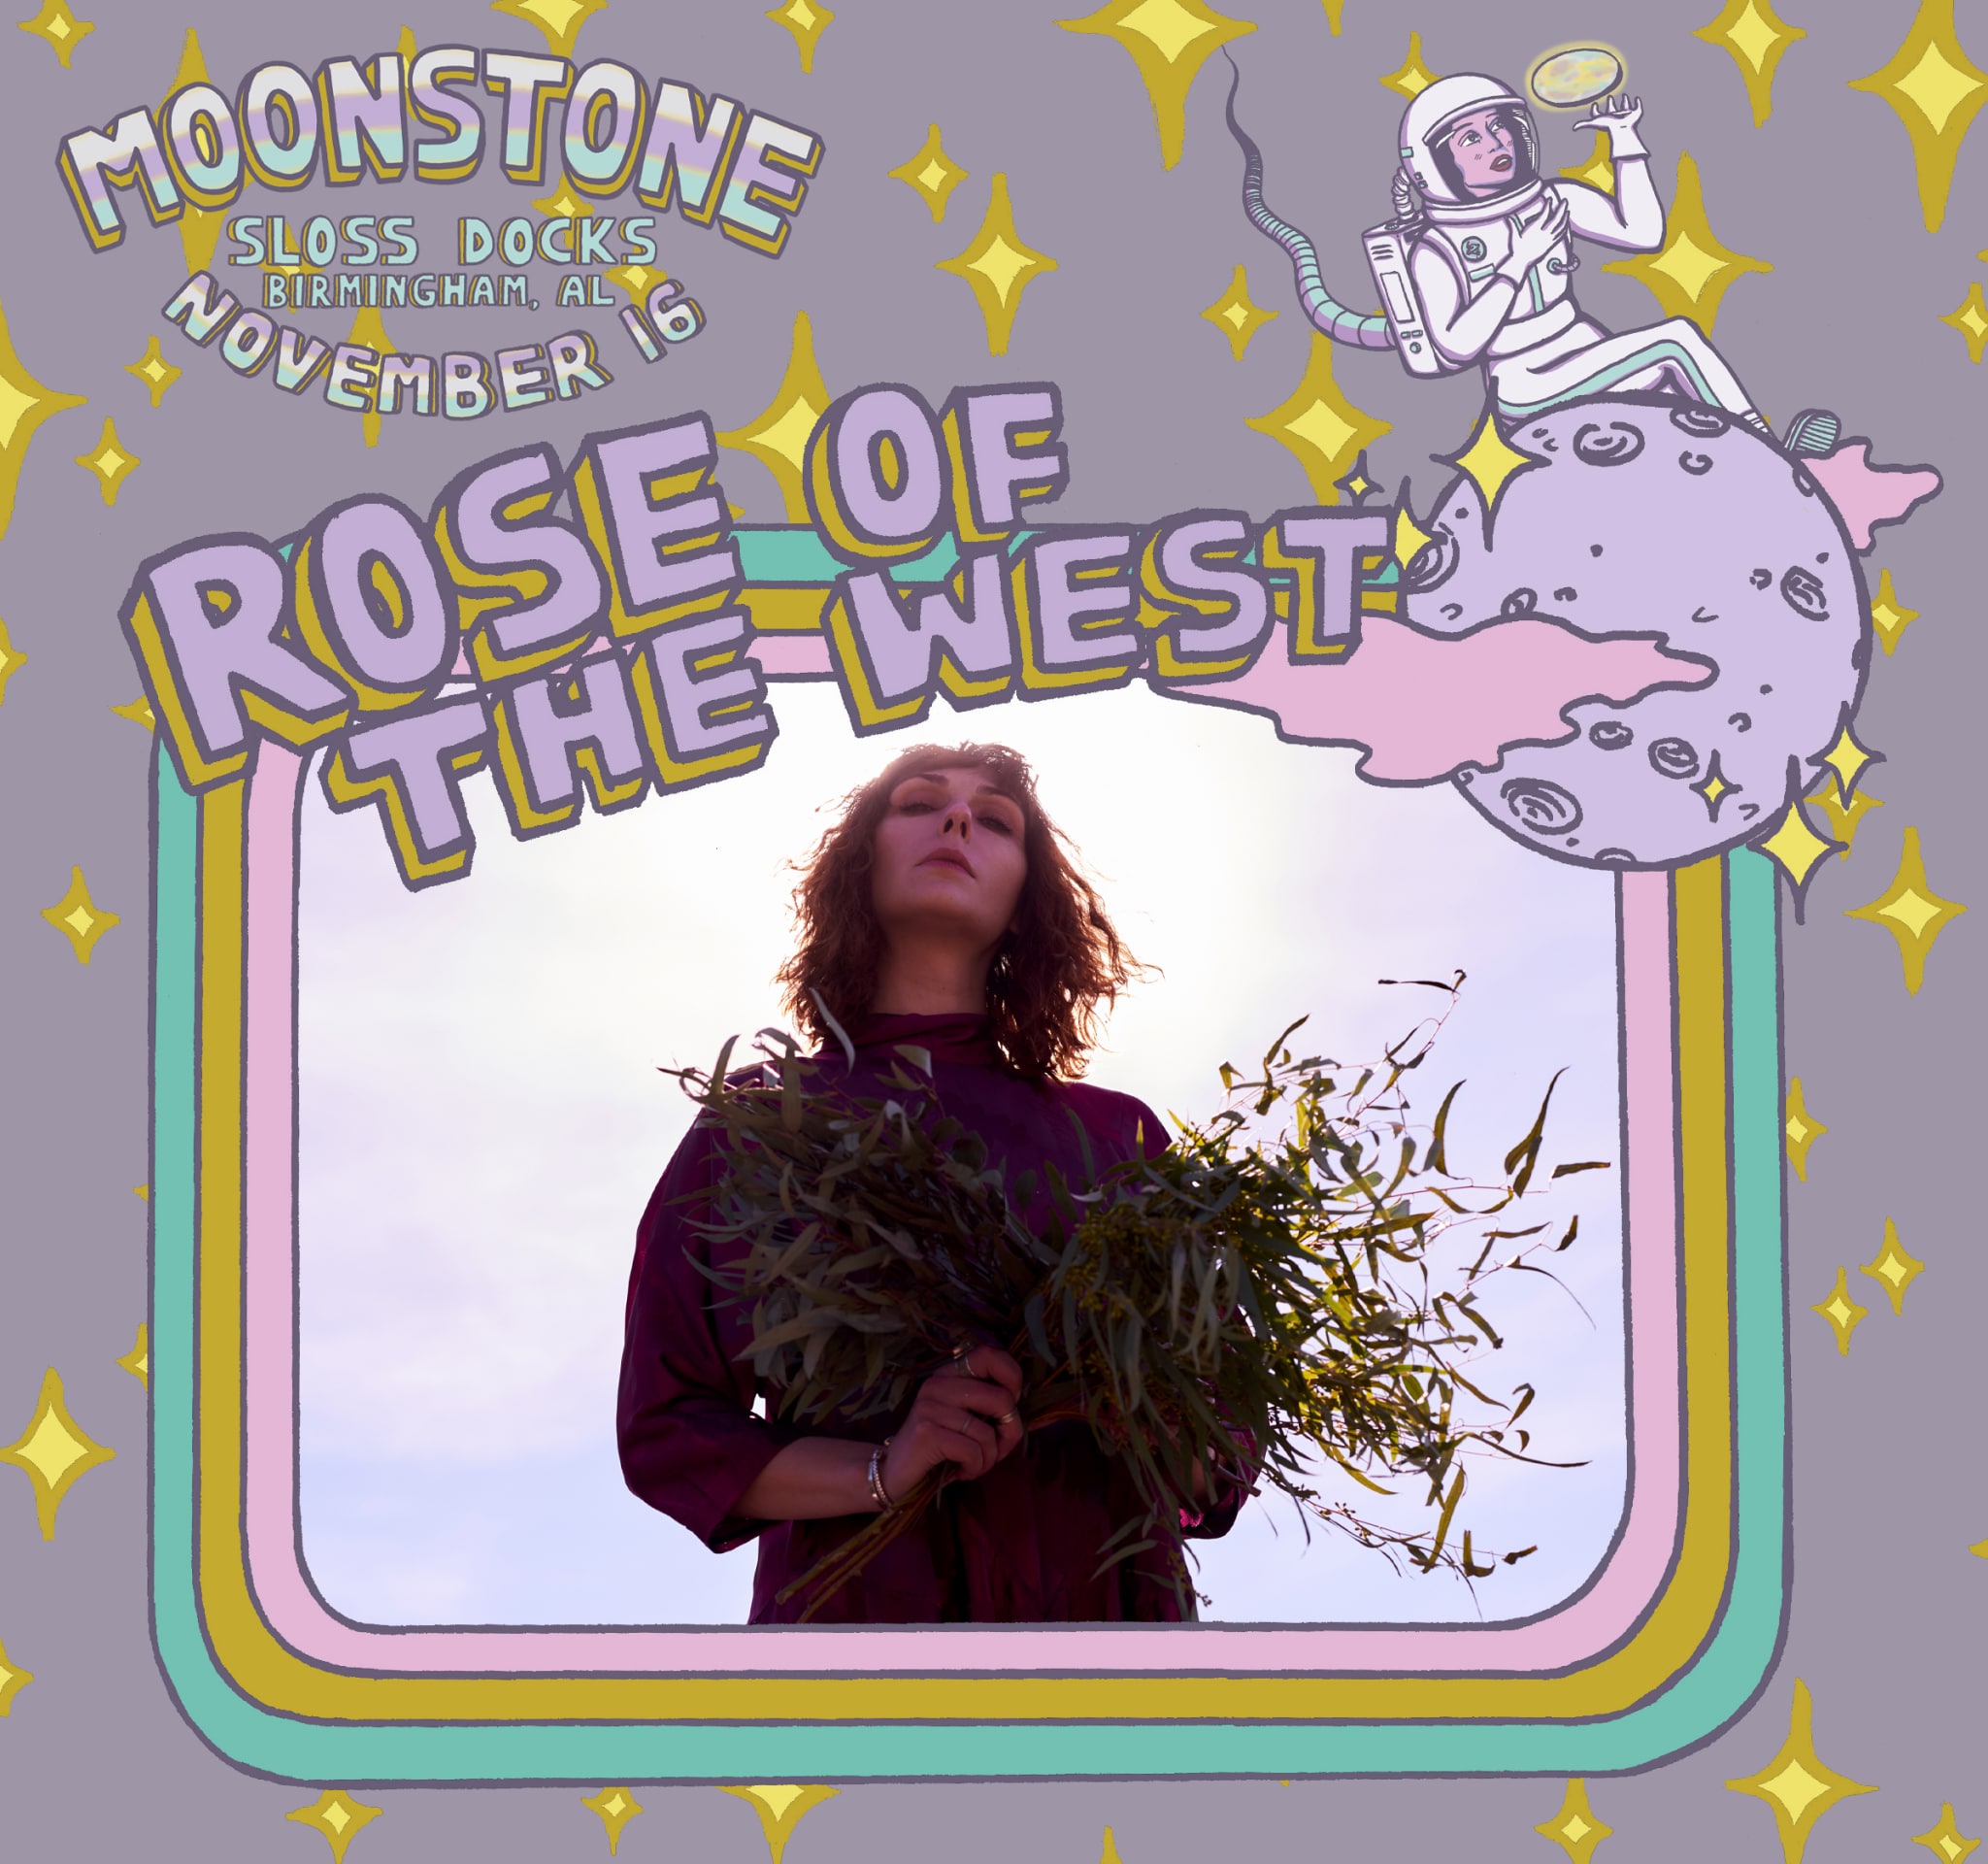 roseofthewest annouce Moonstone Festival, a female focused music and arts fest, happening Nov. 16th at Sloss Docks. Win VIP tickets!